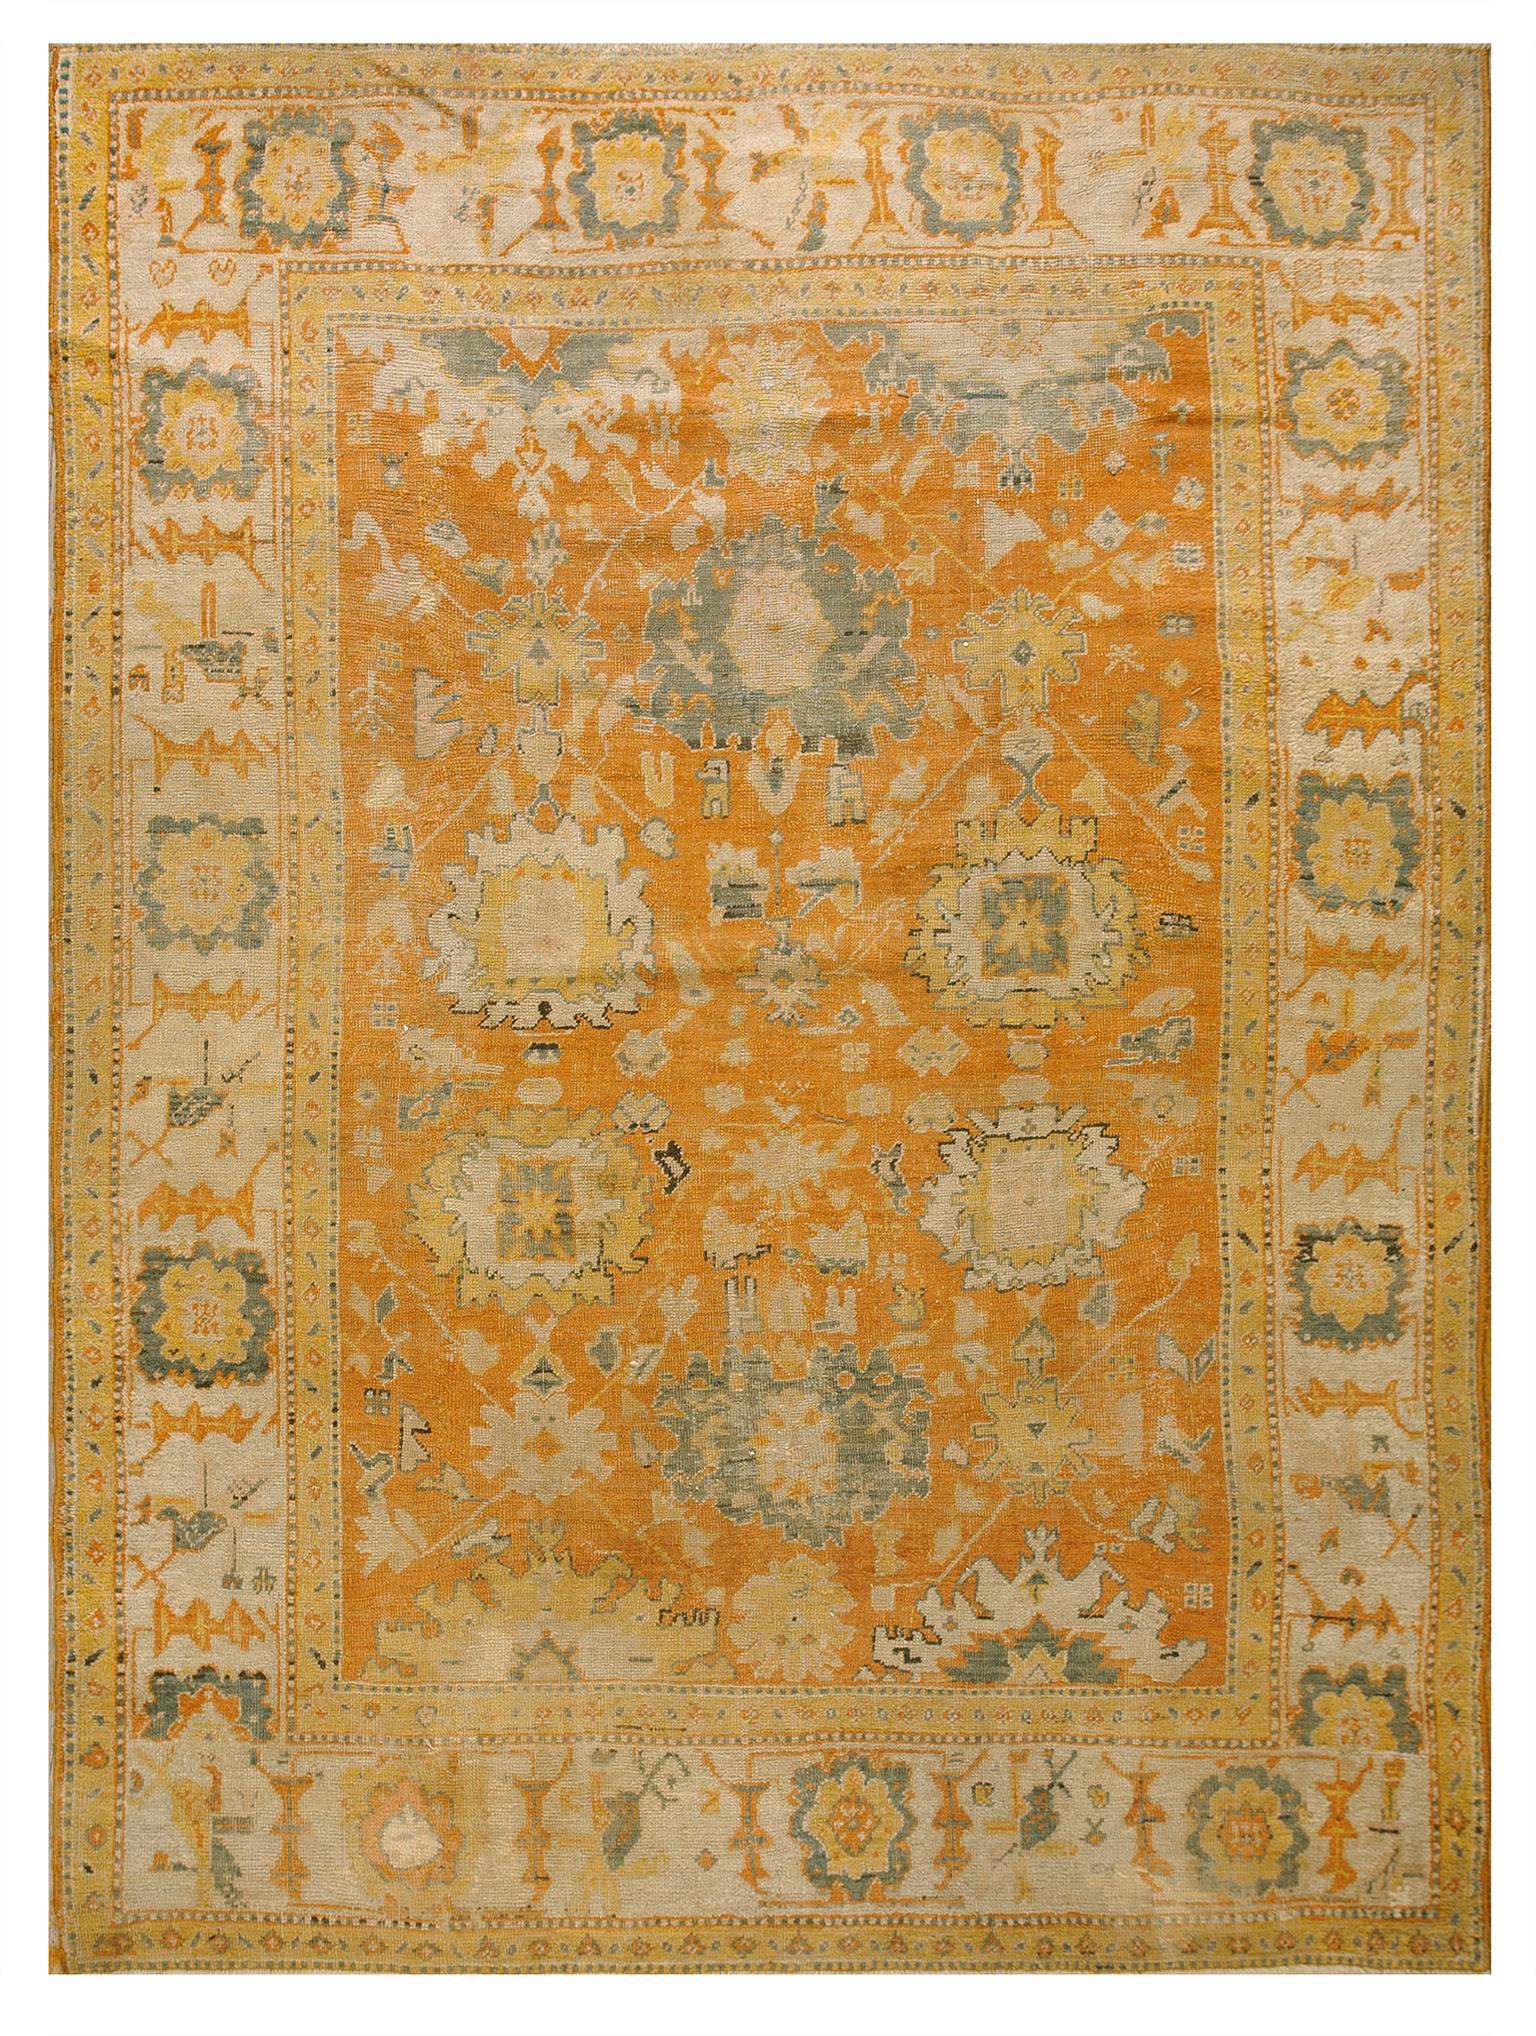 Hand-Knotted Late 19th Century Turkish Oushak Carpet ( 8'4''x 11'2'' - 254 x 340 ) For Sale